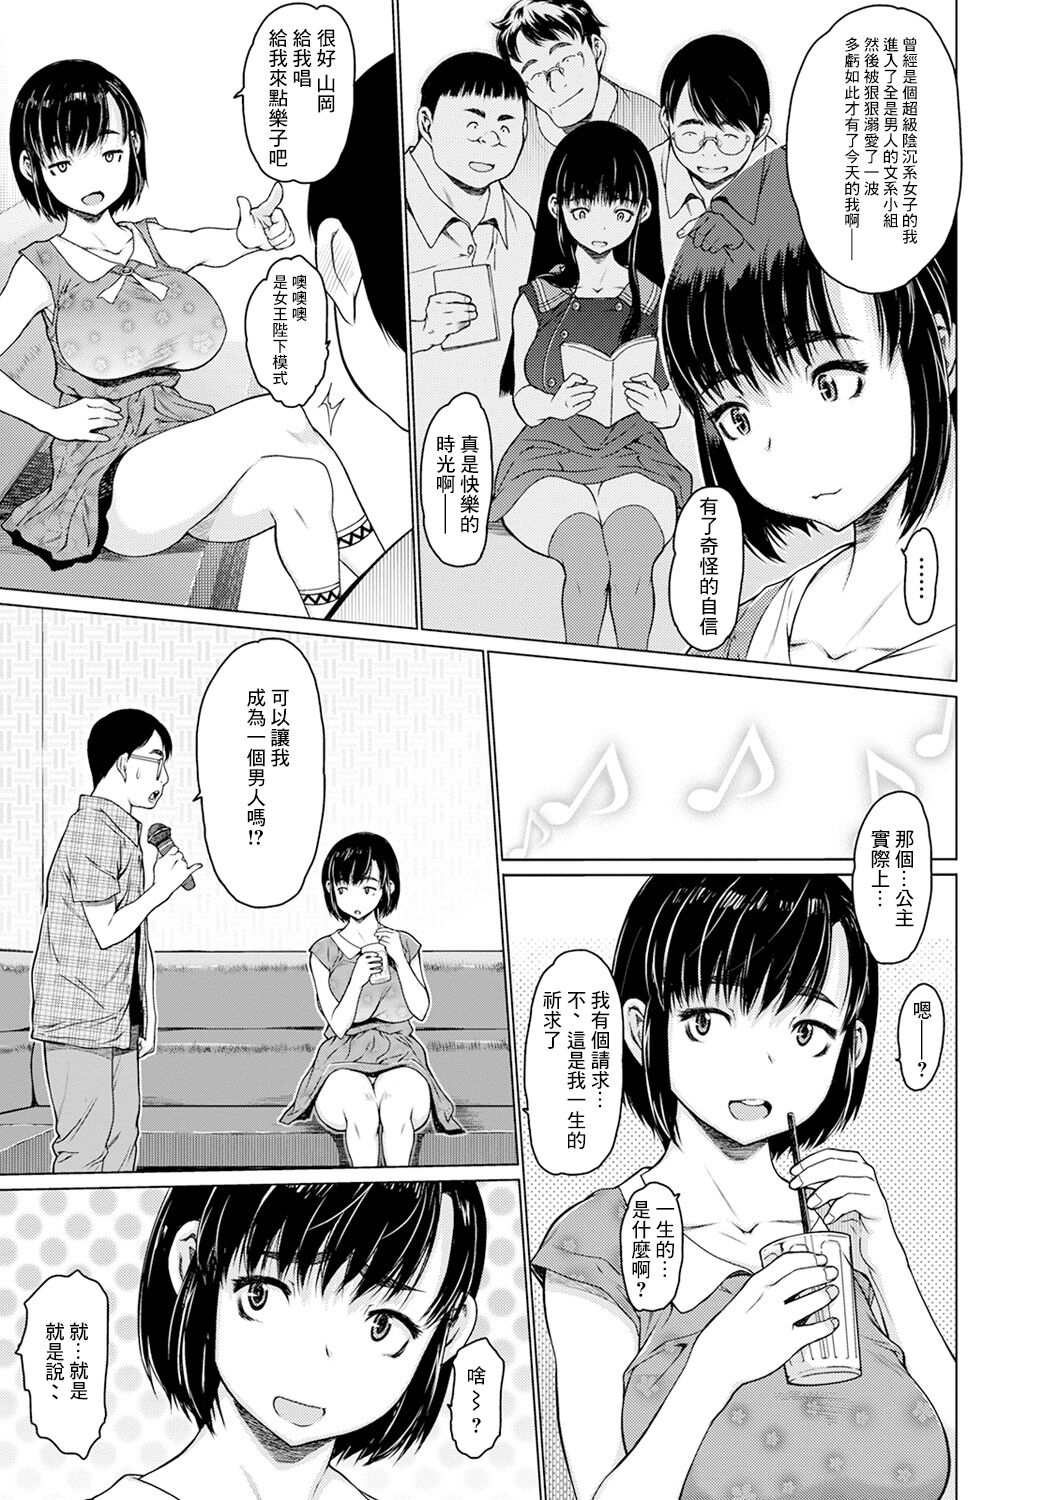 [Zero no Mono] Only once after (COMIC Shigekiteki SQUIRT!! Vol. 17) [Chinese] [Digital] [ゼロの者] Only once after (コミック刺激的SQUIRT!! Vol.17) [中国翻訳] [DL版]